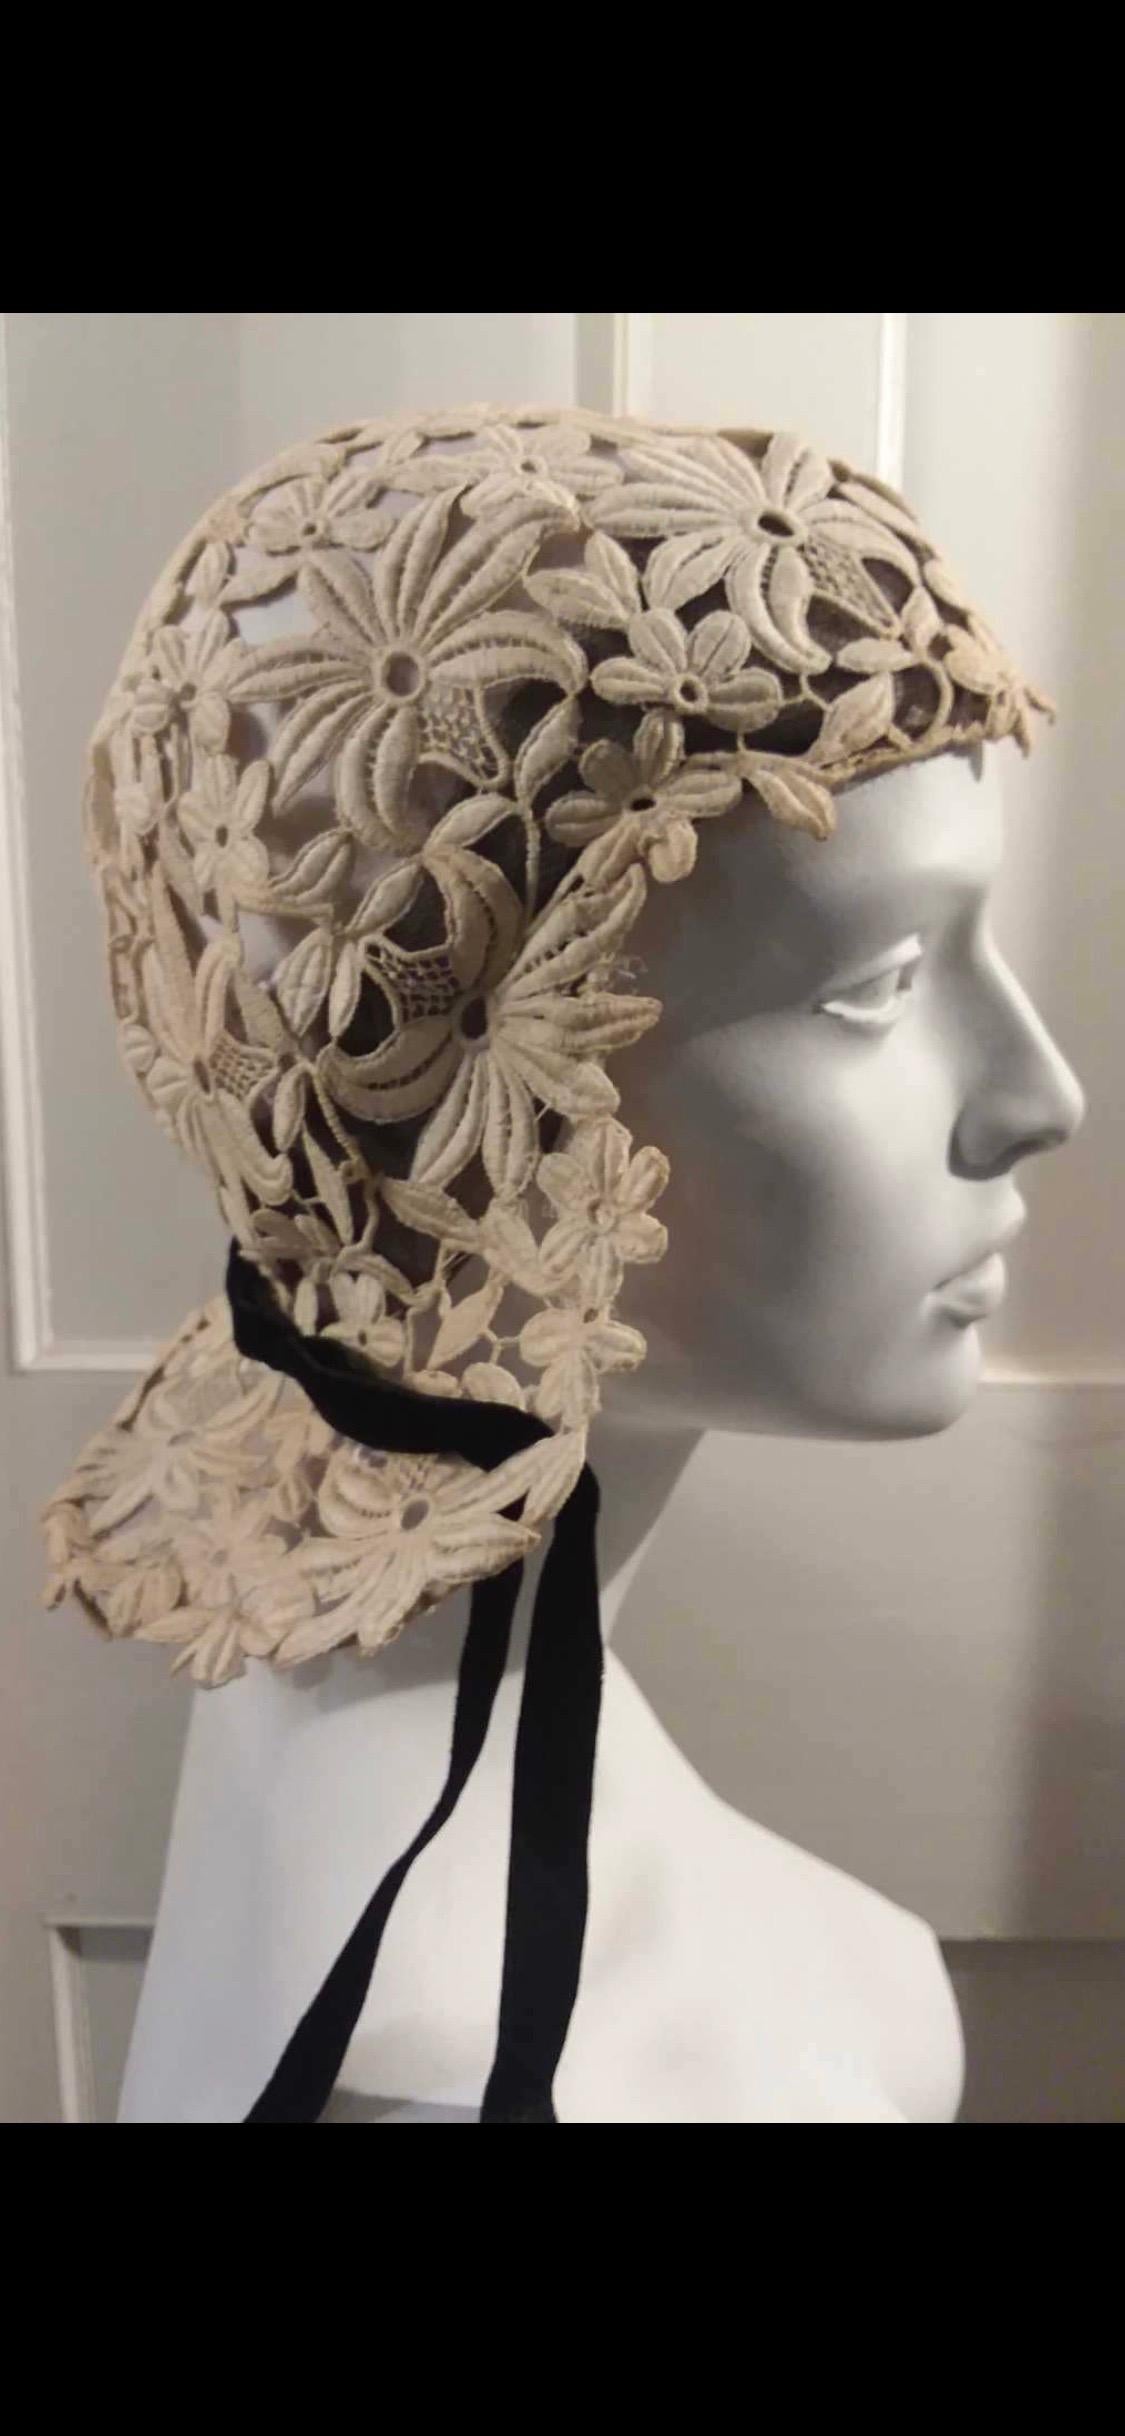 1930s Suzanne Rémy Belgian Lace Art Deco Joan of Arc Style Helmet Cloche Wedding Hat.

 Suzanne Rémy trained with Schiaparelli and was the head milliner at Agnes of Paris before emigrating to the US after WW2 and opening a millinery shop with Roger